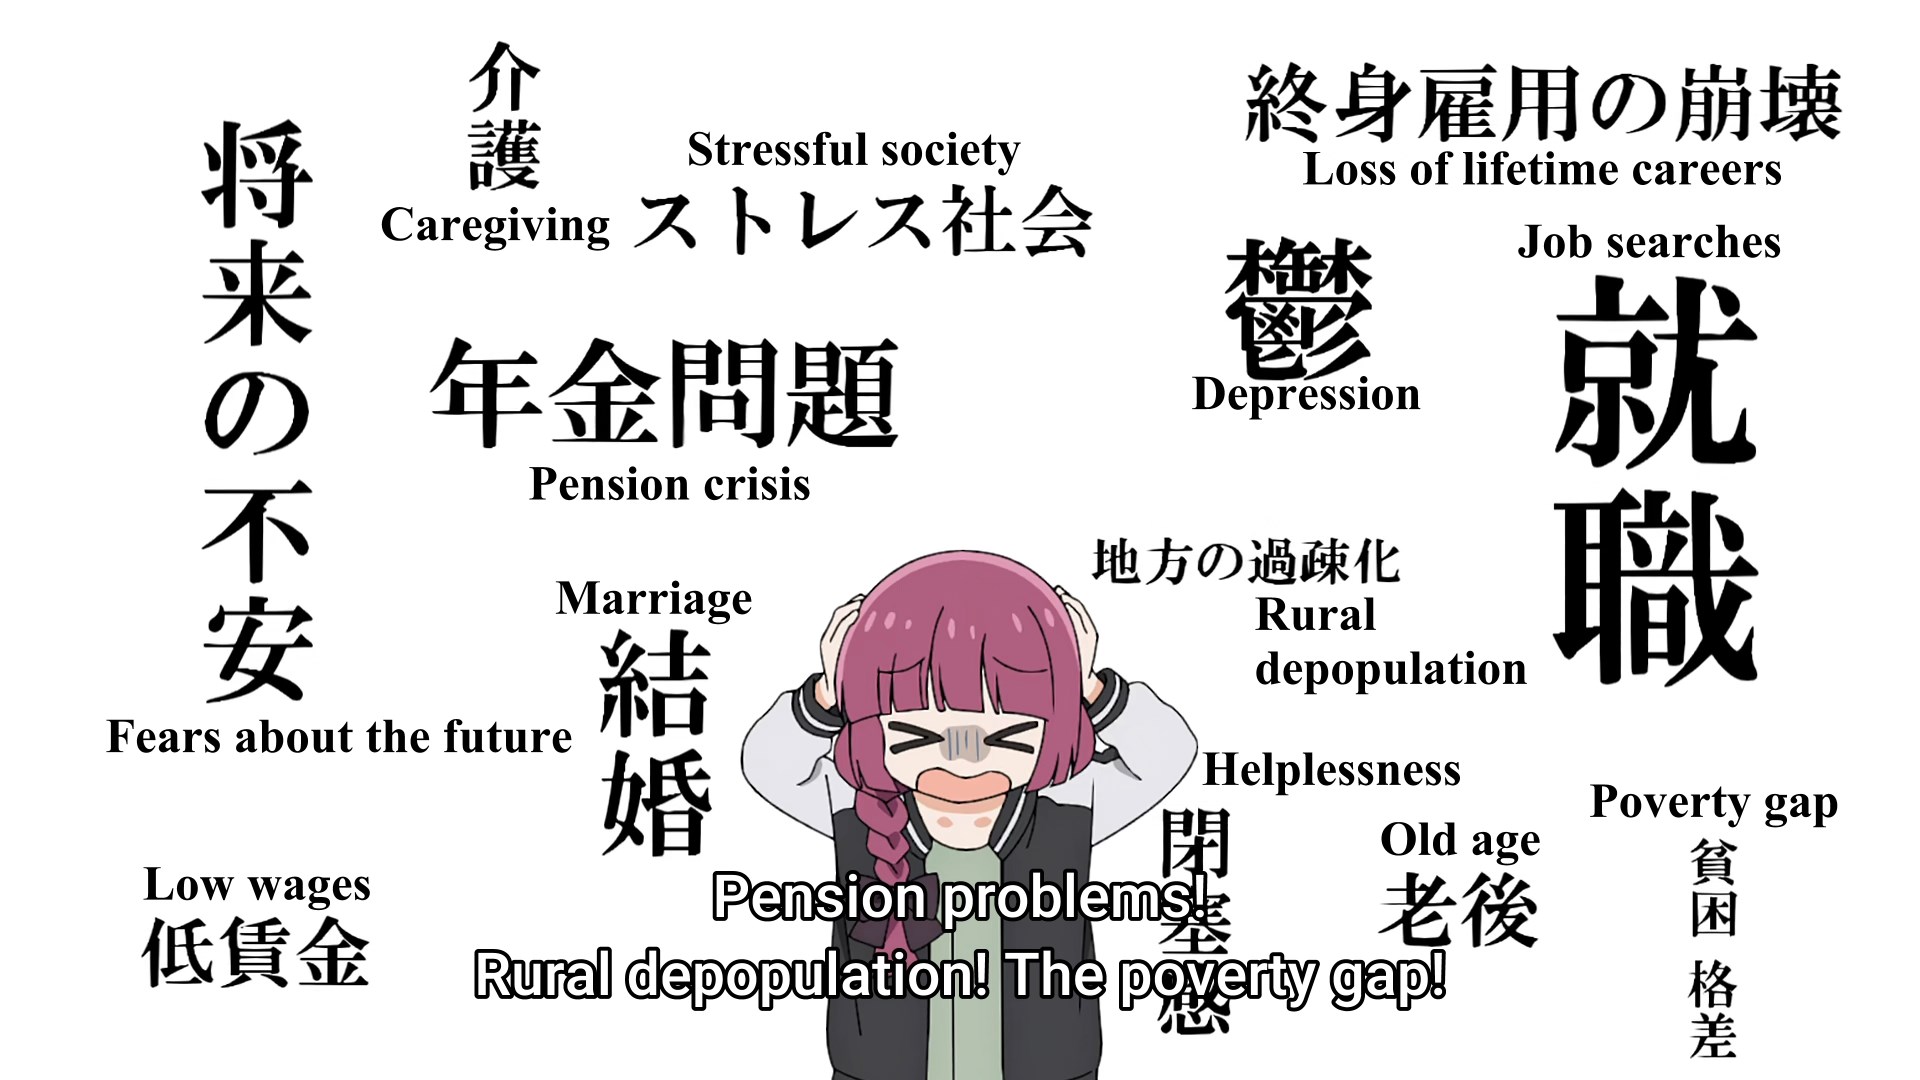 Kikuri being oppressed by all the world's problems, showing up in oppressive kanji in the background: pension problems! Rural depopulation The poverty gap! She looks stressed and with her hands on her head blocking her ears.